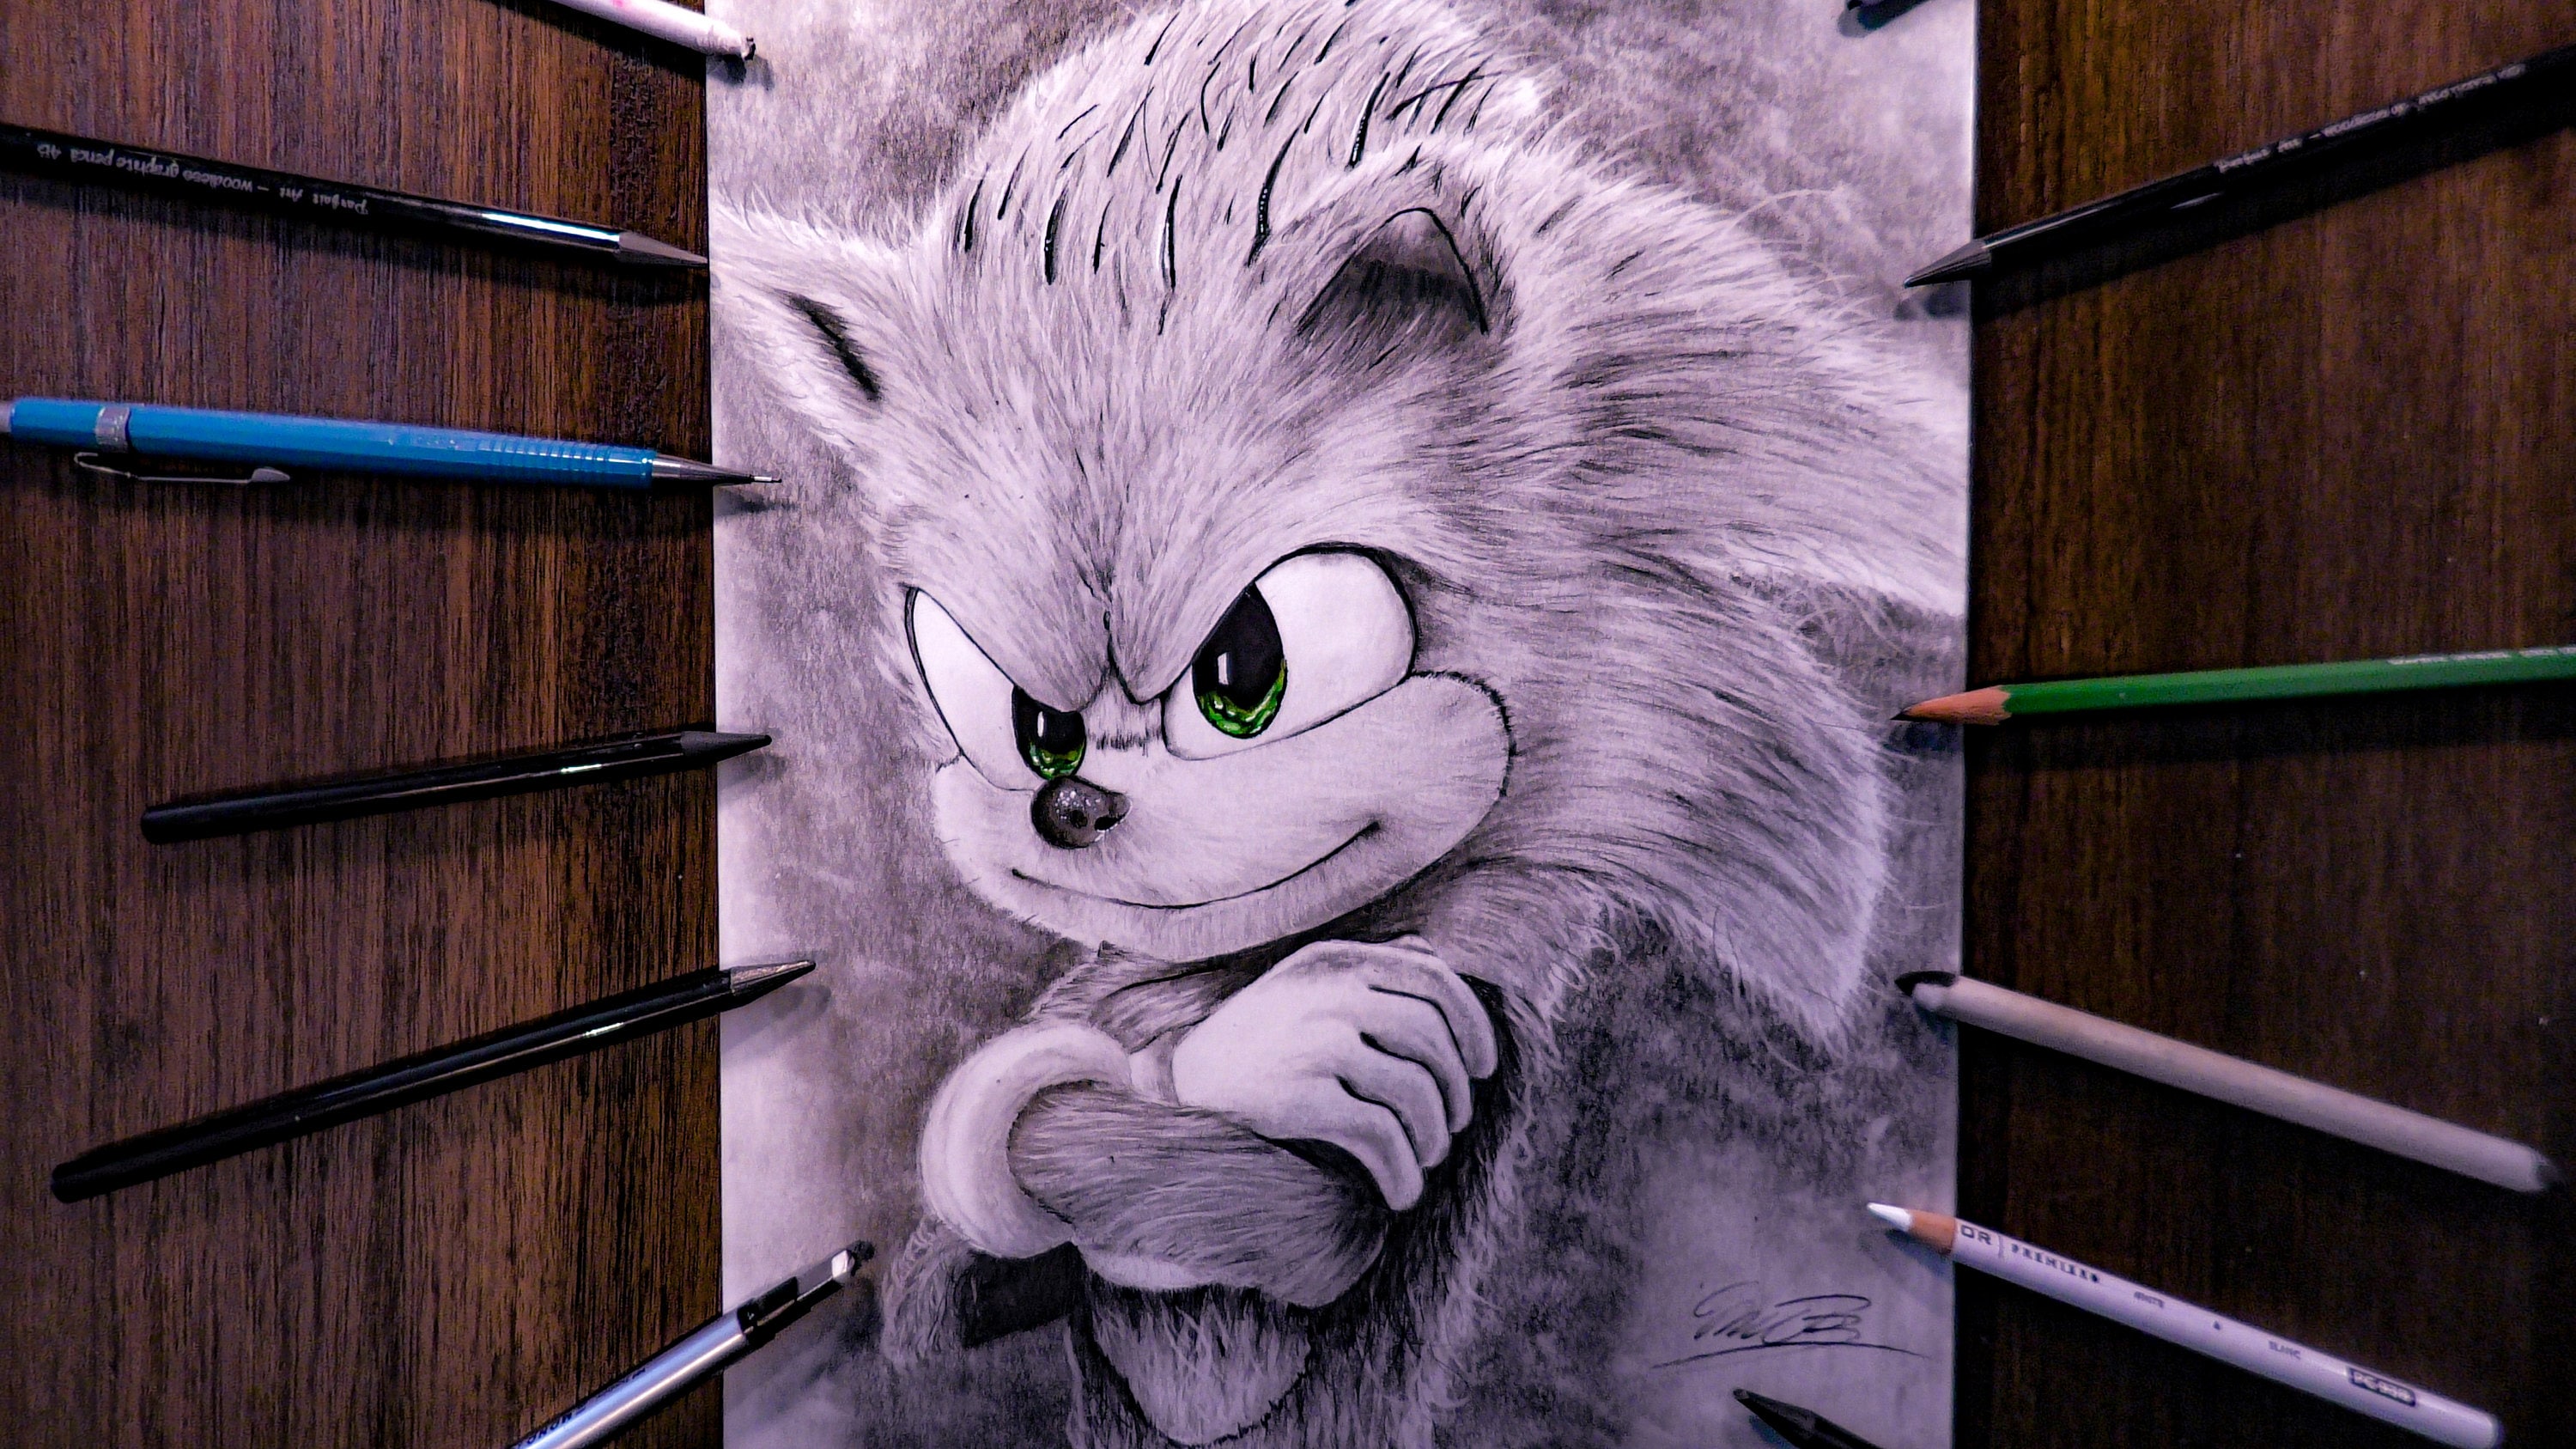 Drawing of Sonic the Hedgehog in Pencil - Etsy